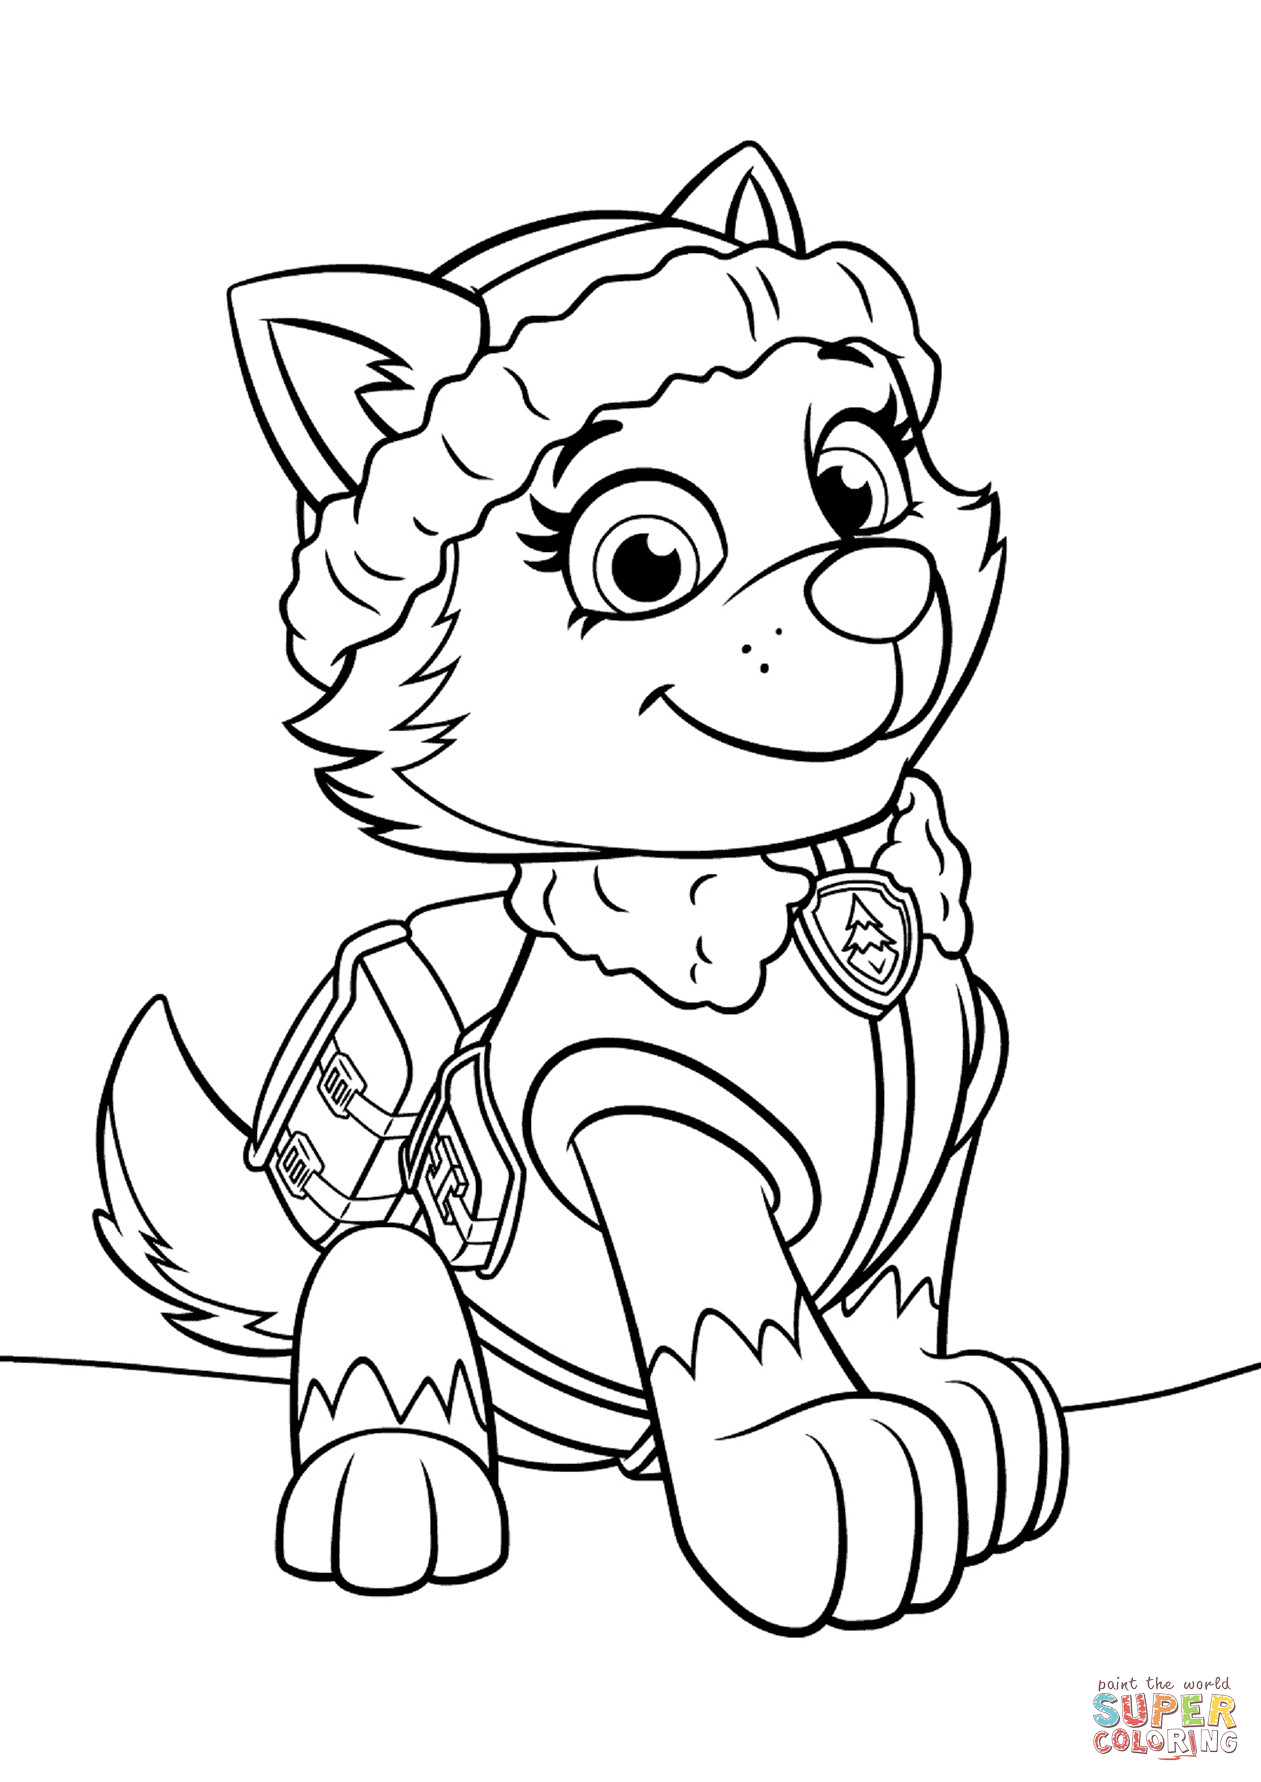 Free Printable Coloring Pages Paw Patrol
 Paw Patrol Everest coloring page